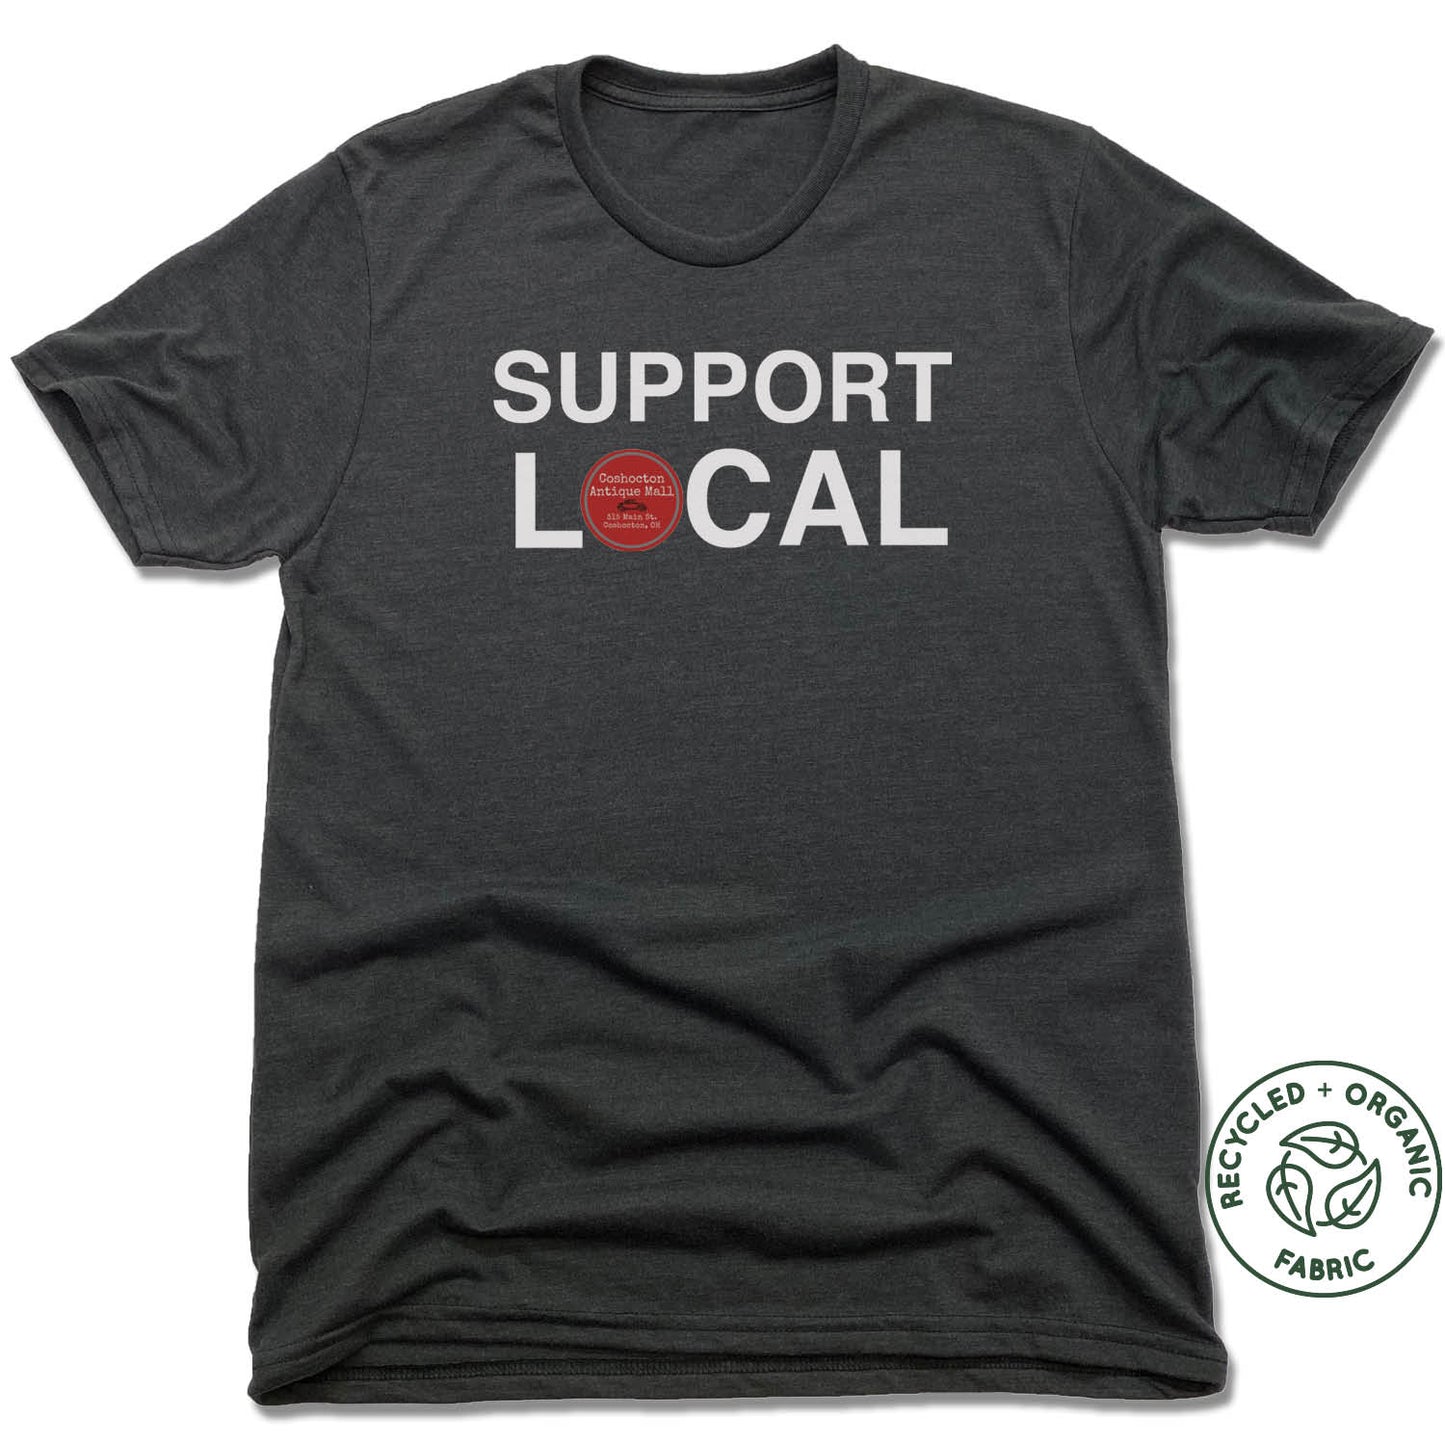 COSHOCTON ANTIQUE MALL | UNISEX BLACK Recycled Tri-Blend | SUPPORT LOCAL